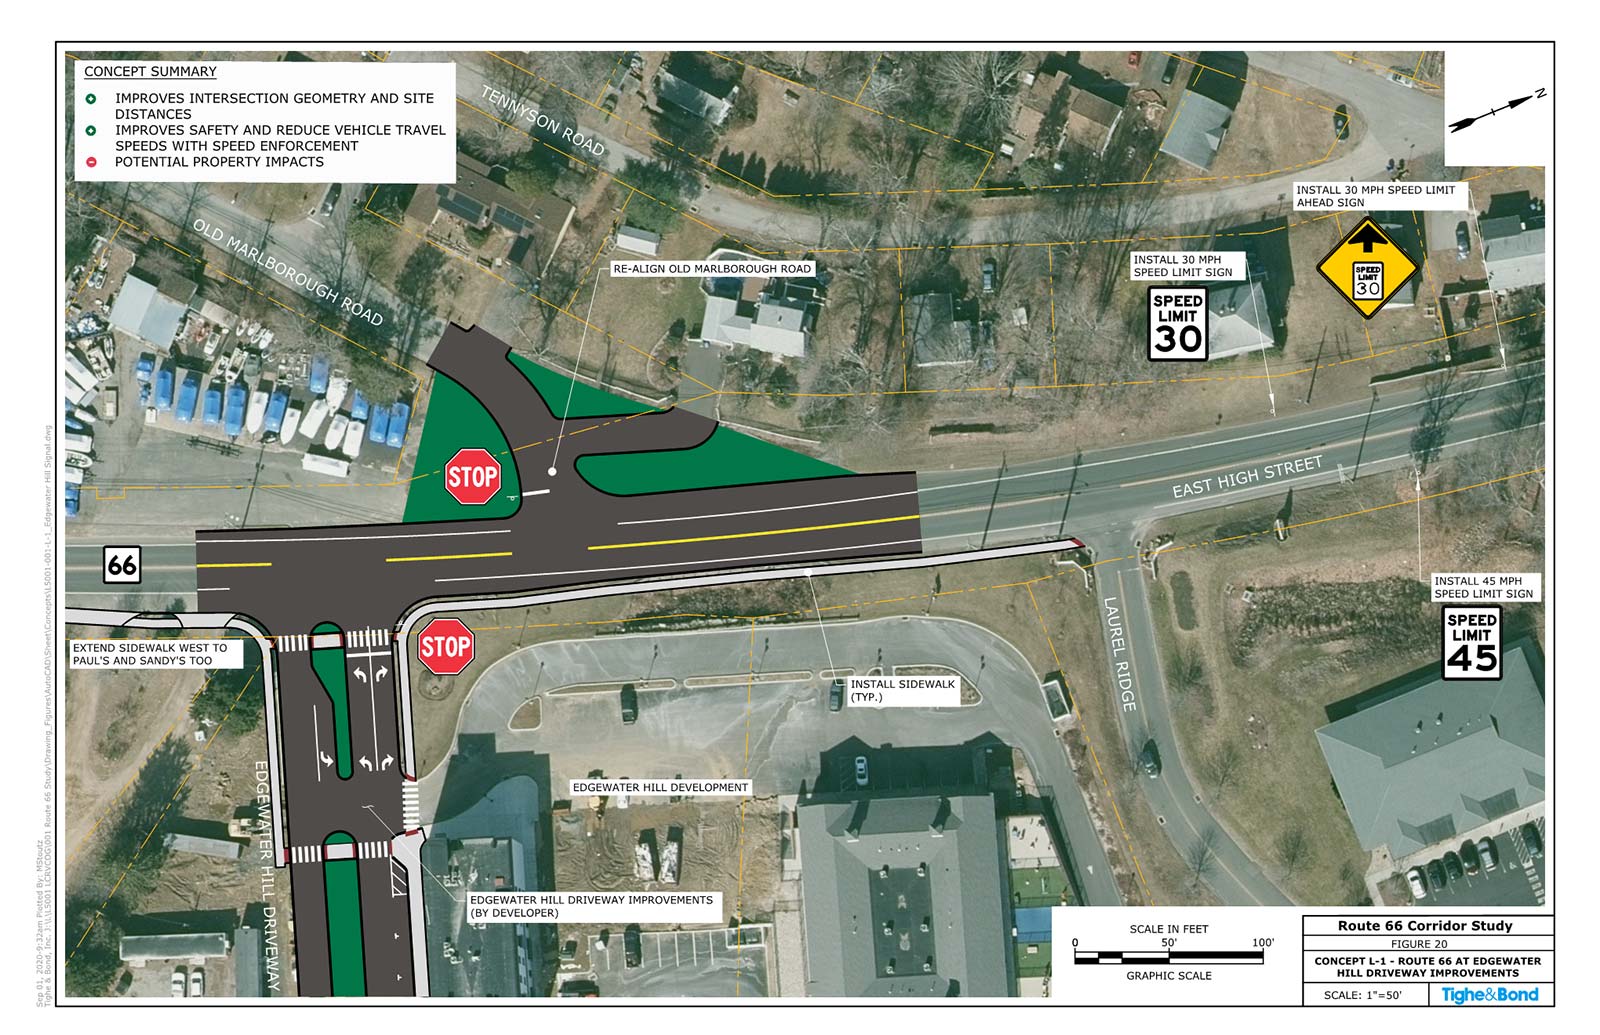 Route 66 at Edgewater Hill Driveway Intersection Improvements (Concept L-1). Route 66 Transportation Study, Portland and East Hampton, CT.